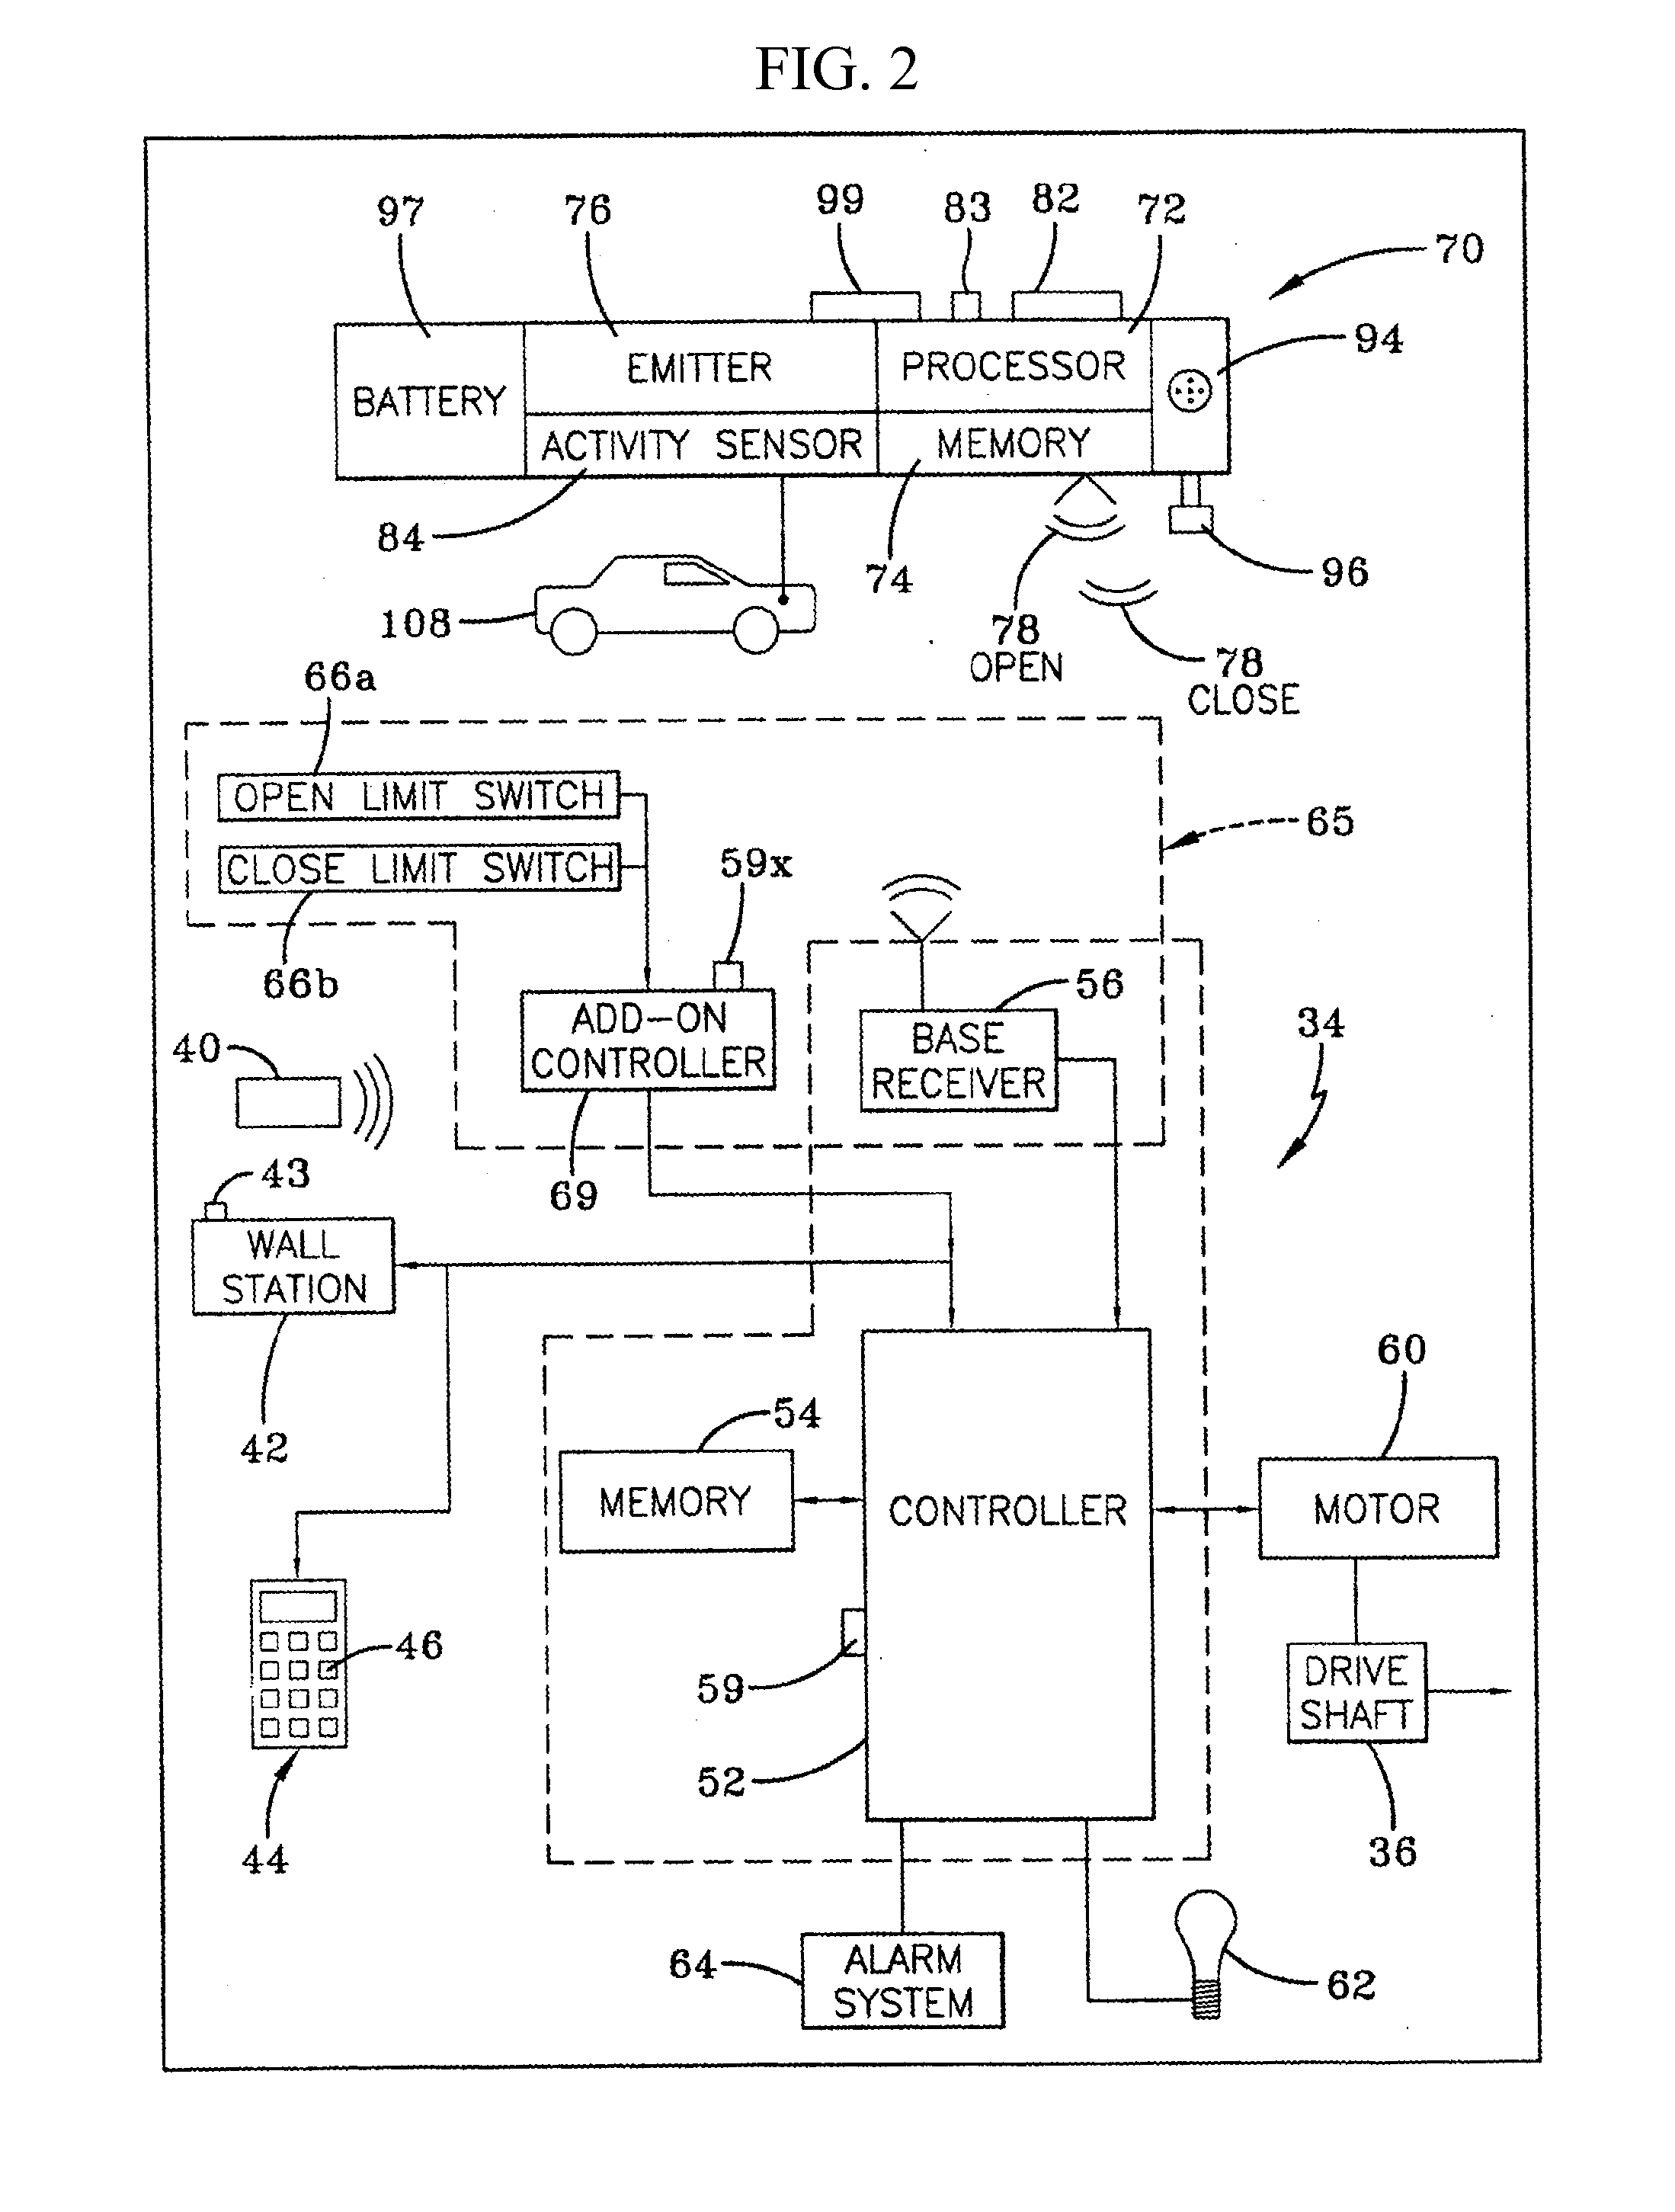 System and Methods for Automatically Moving Access Barriers Initiated by Mobile Transmitter Devices